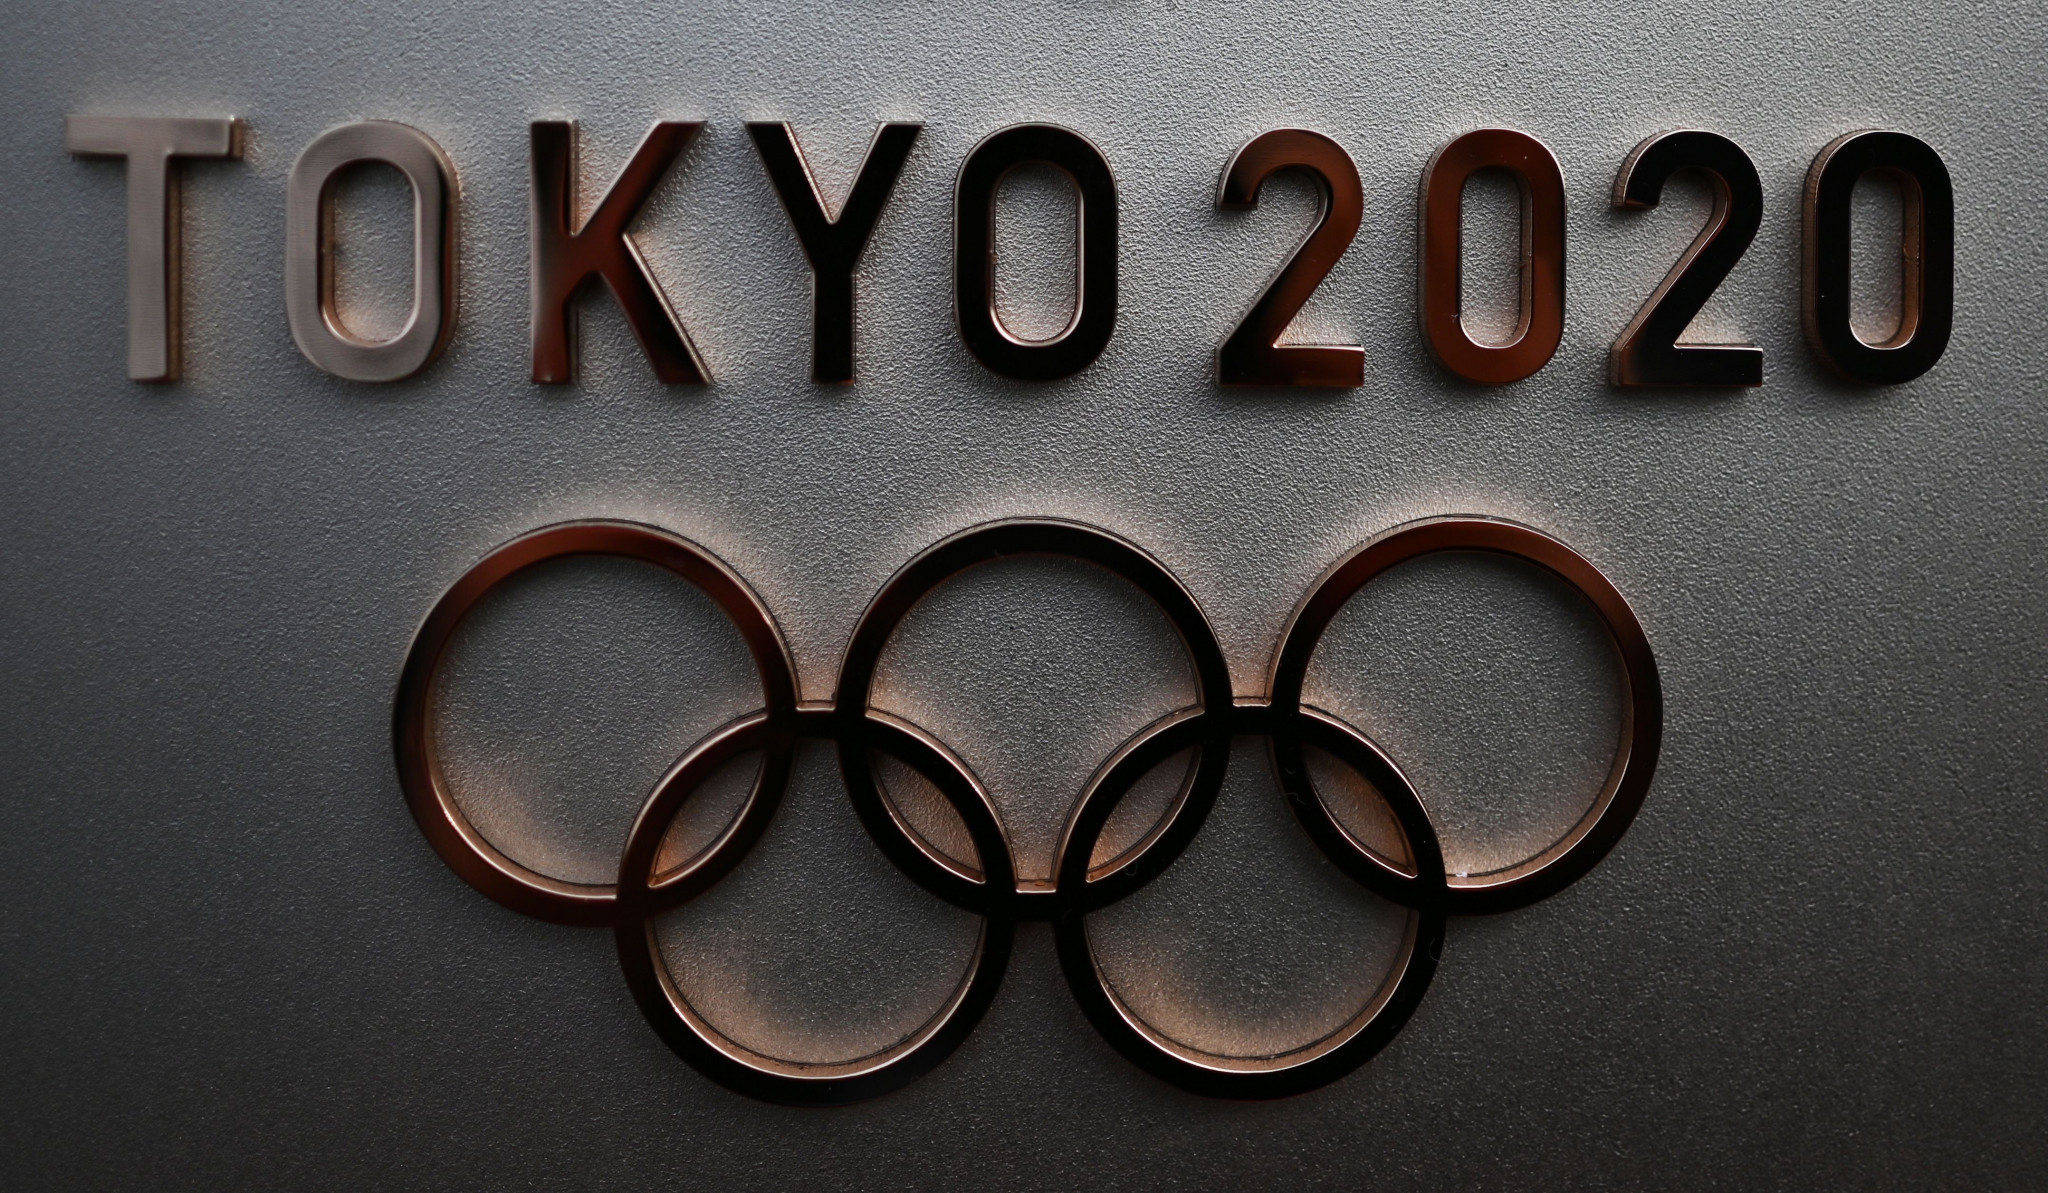 Organisers of the Tokyo 2020 Olympic Games are set to announce its motto tomorrow ©Getty Images